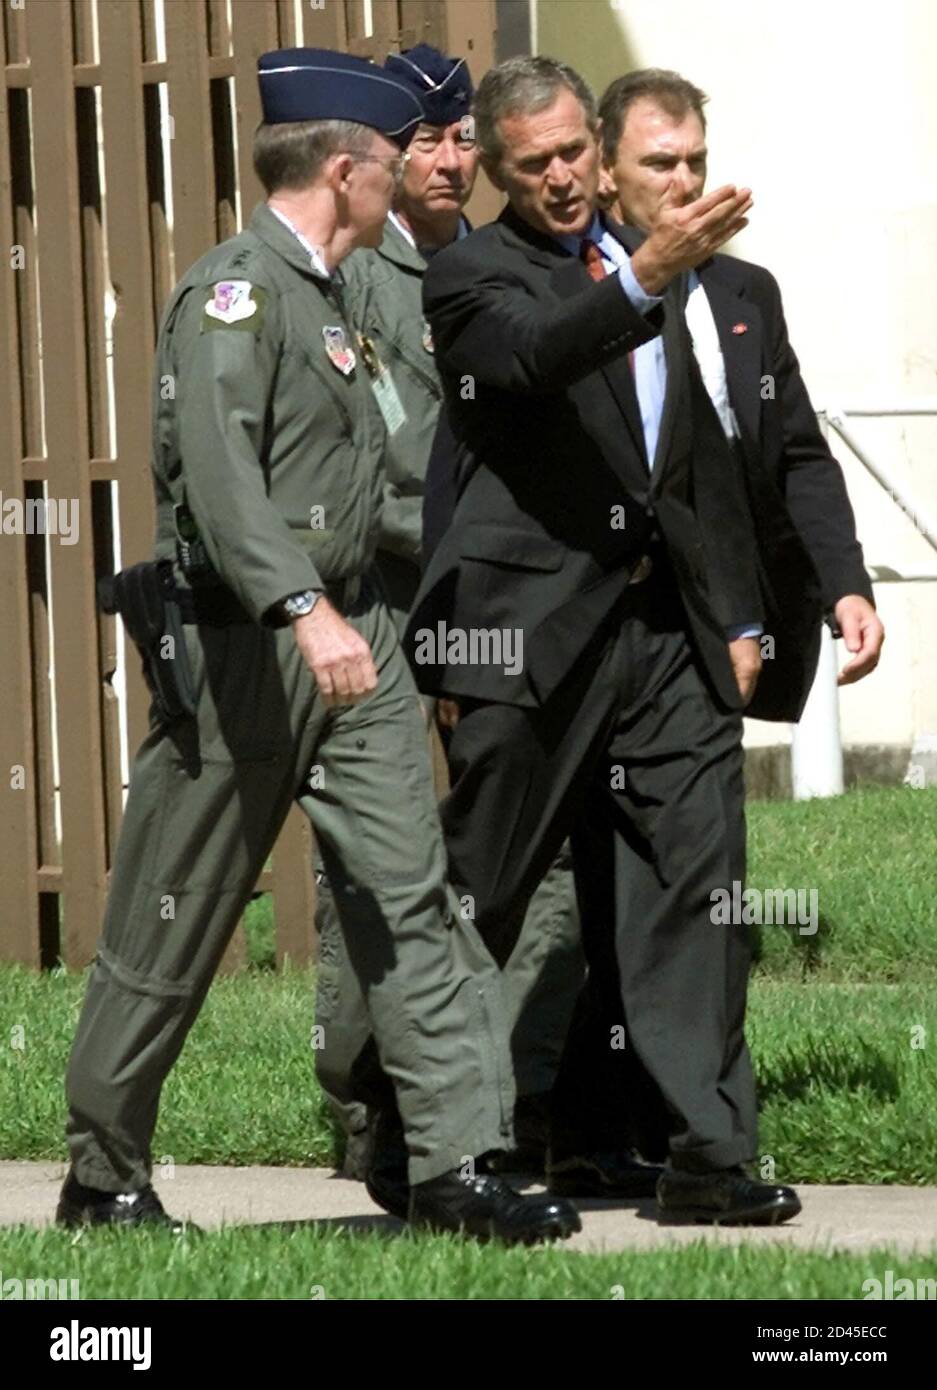 U.S. President George W. Bush walks with Lt. Gen Tom Keck, Commander of the 8th Air Force, at Barksdale AFB near Shreveport, Louisiana, September 11, 2001. Bush later departed Barksdale AFB for an undisclosed location after making a statement on the recent terrorist acts. REUTERS/Win McNamee  WM/ME Stock Photo